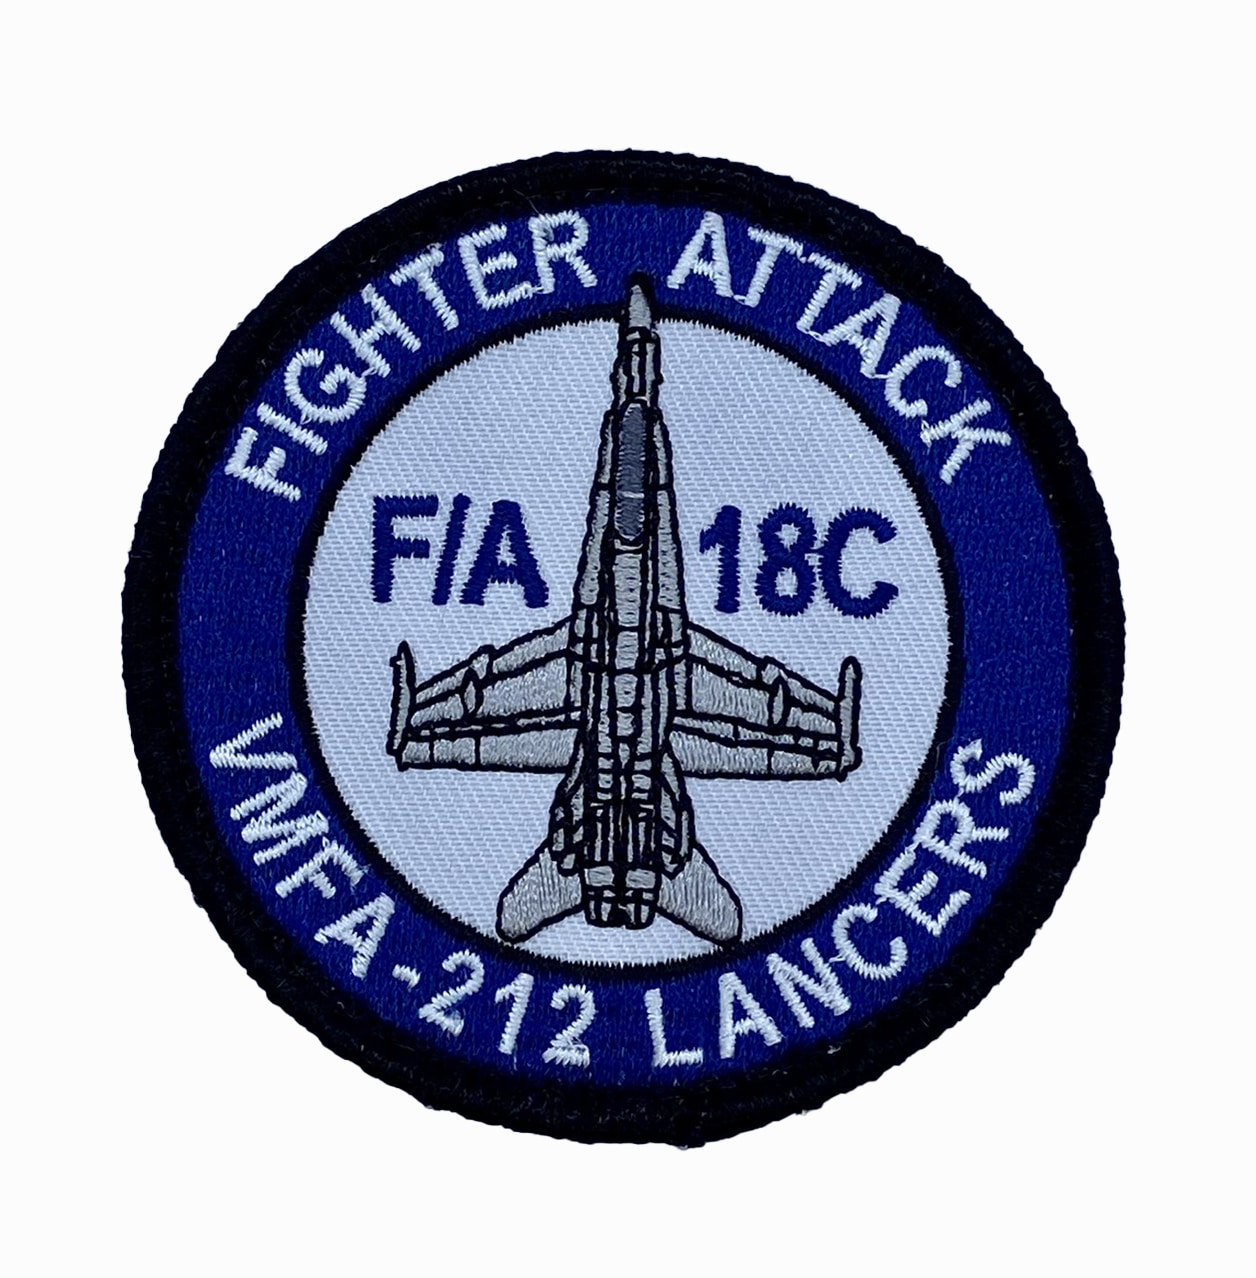 VMFA-212 Lancers F-18 Shoulder Patch - With Hook and Loop